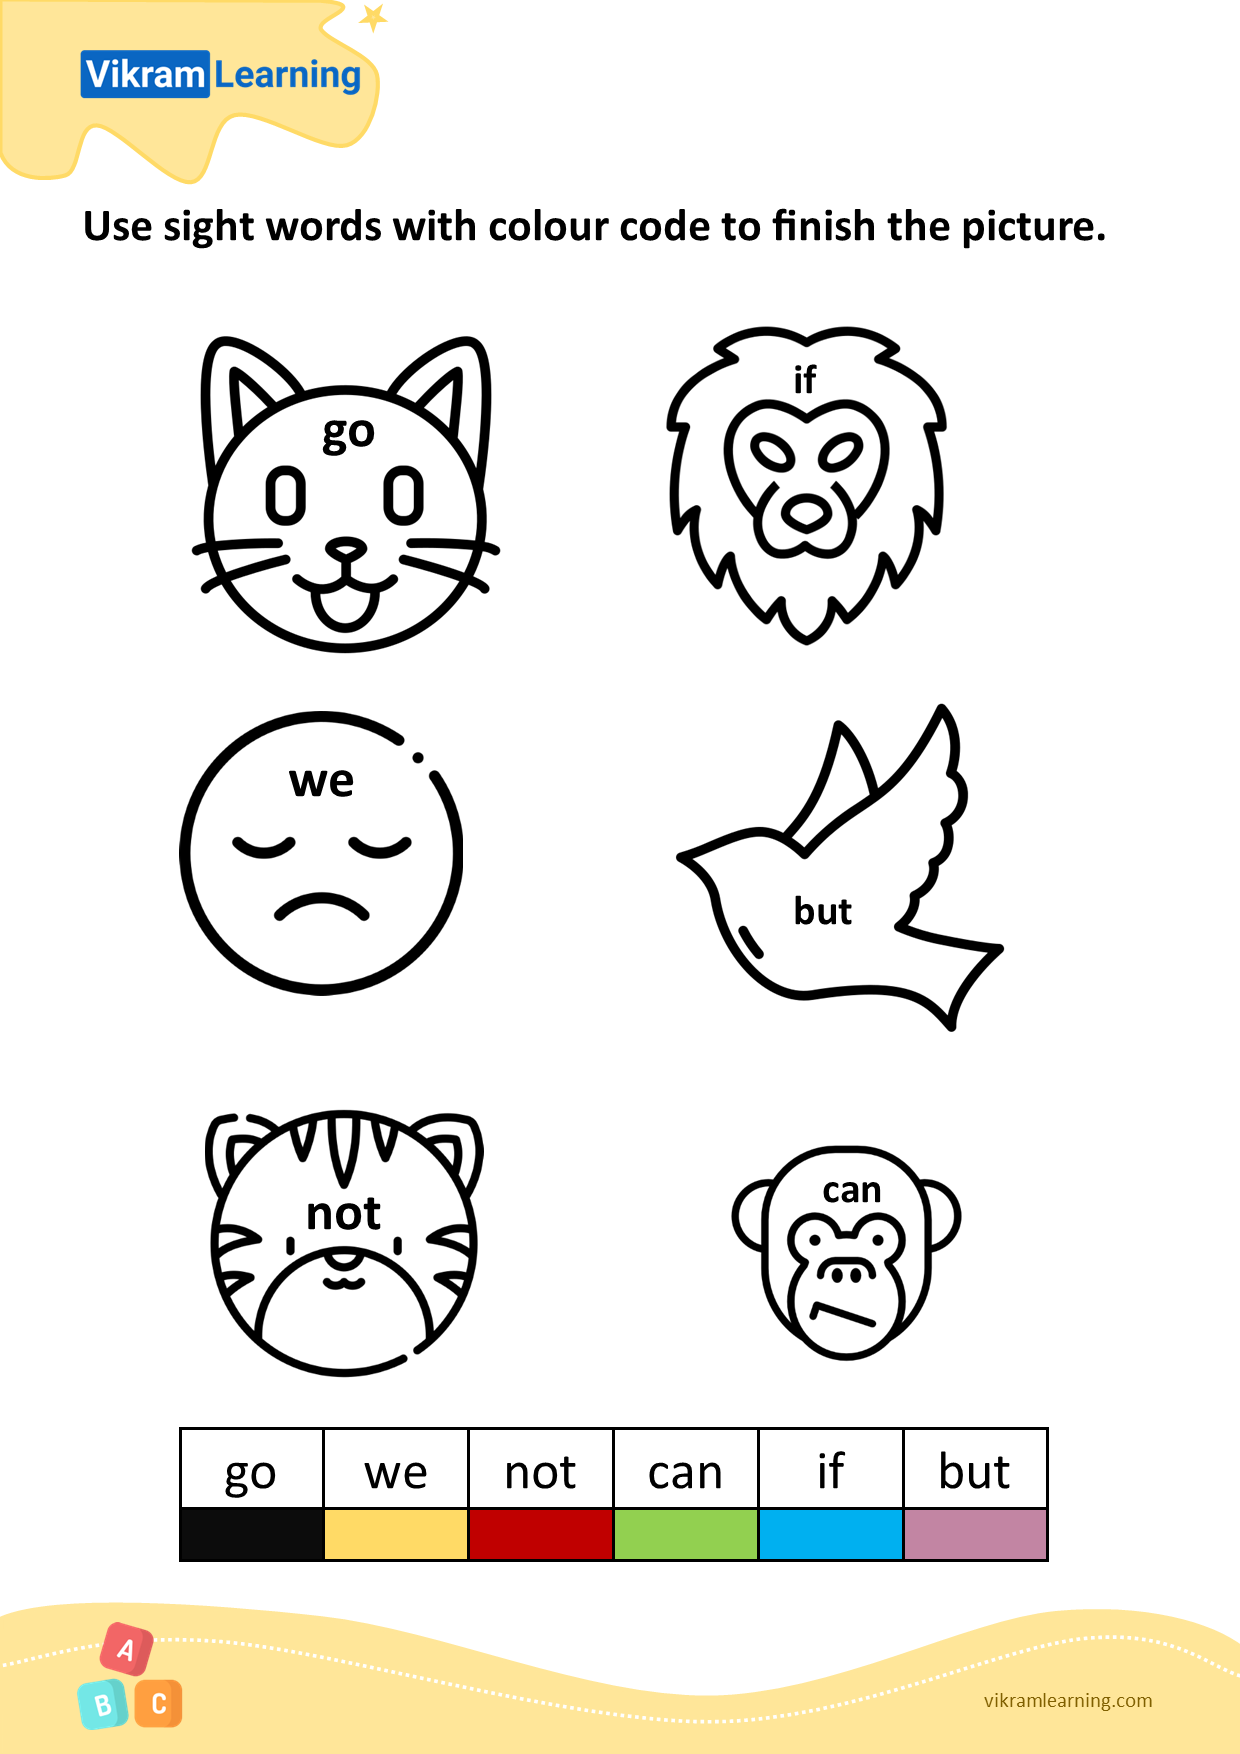 Download use sight words with colour code to finish the picture - pattern 2 worksheets